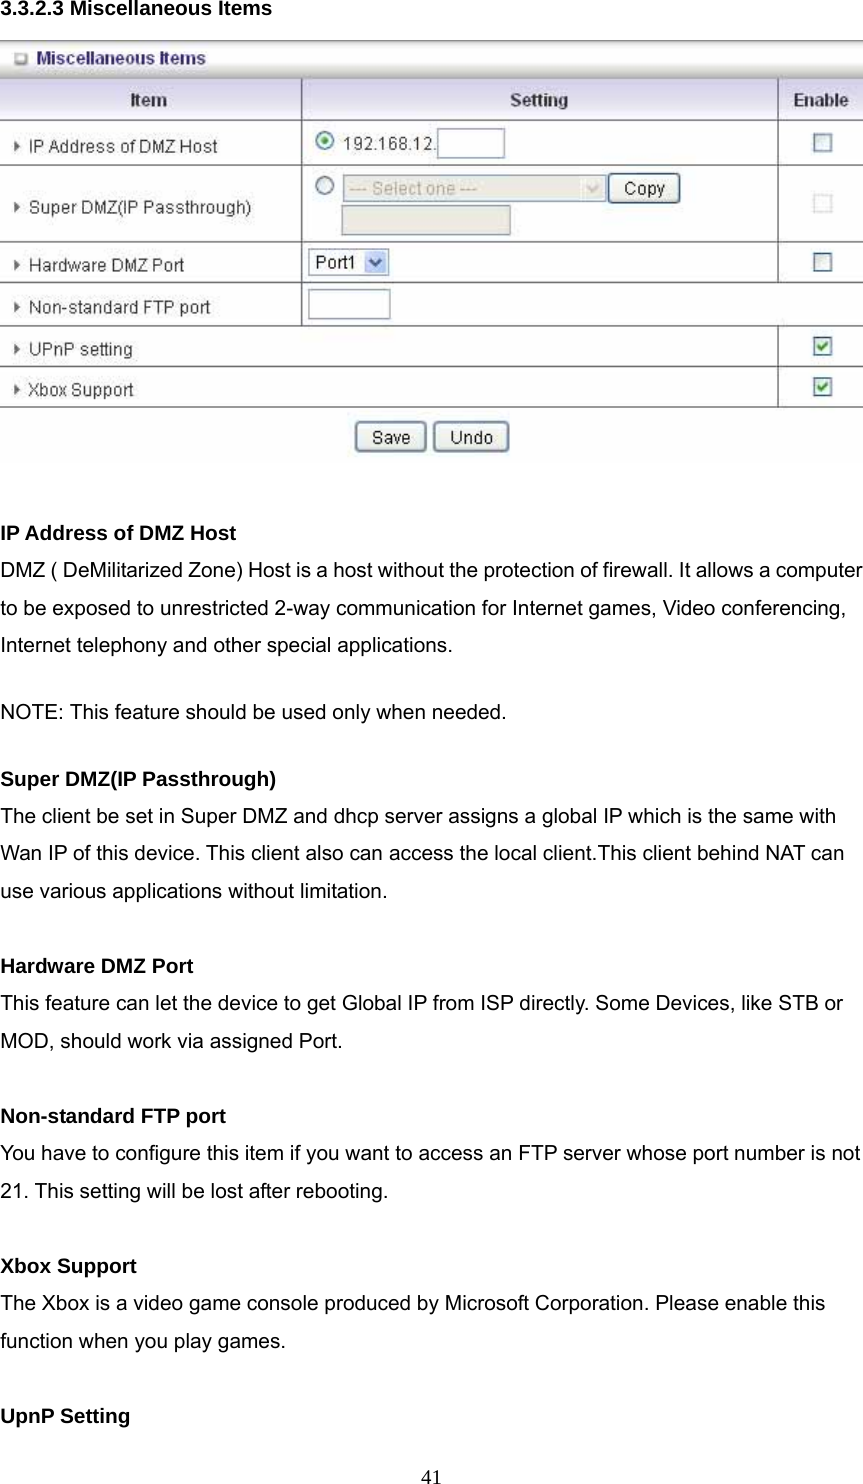  413.3.2.3 Miscellaneous Items   IP Address of DMZ Host DMZ ( DeMilitarized Zone) Host is a host without the protection of firewall. It allows a computer to be exposed to unrestricted 2-way communication for Internet games, Video conferencing, Internet telephony and other special applications.   NOTE: This feature should be used only when needed.   Super DMZ(IP Passthrough) The client be set in Super DMZ and dhcp server assigns a global IP which is the same with Wan IP of this device. This client also can access the local client.This client behind NAT can use various applications without limitation.  Hardware DMZ Port This feature can let the device to get Global IP from ISP directly. Some Devices, like STB or MOD, should work via assigned Port.  Non-standard FTP port You have to configure this item if you want to access an FTP server whose port number is not 21. This setting will be lost after rebooting.    Xbox Support The Xbox is a video game console produced by Microsoft Corporation. Please enable this function when you play games.  UpnP Setting 